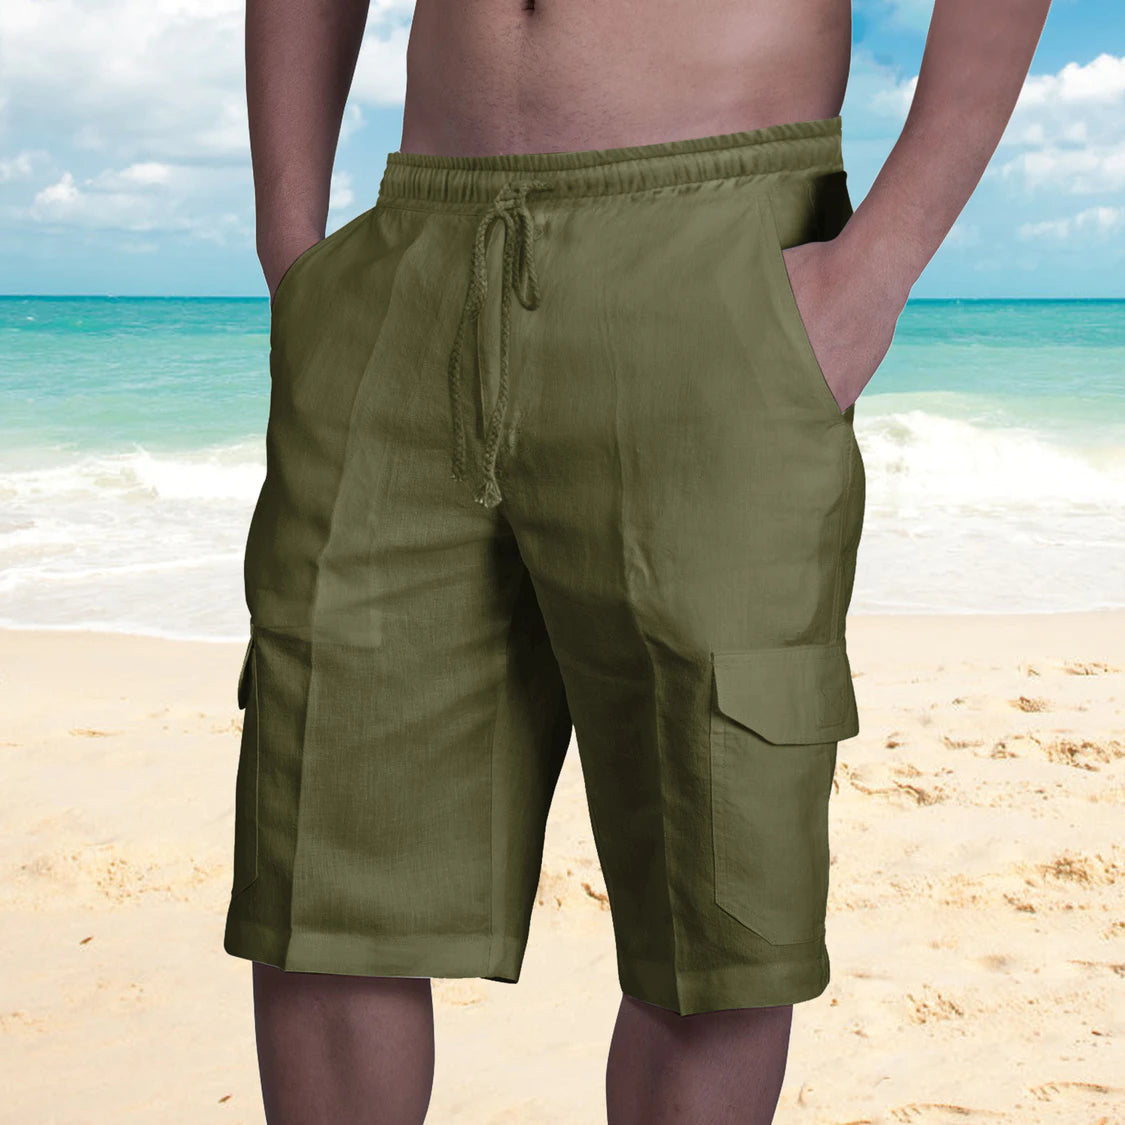 Men's Multiple Bags Tether Beach Shorts Overalls Shorts